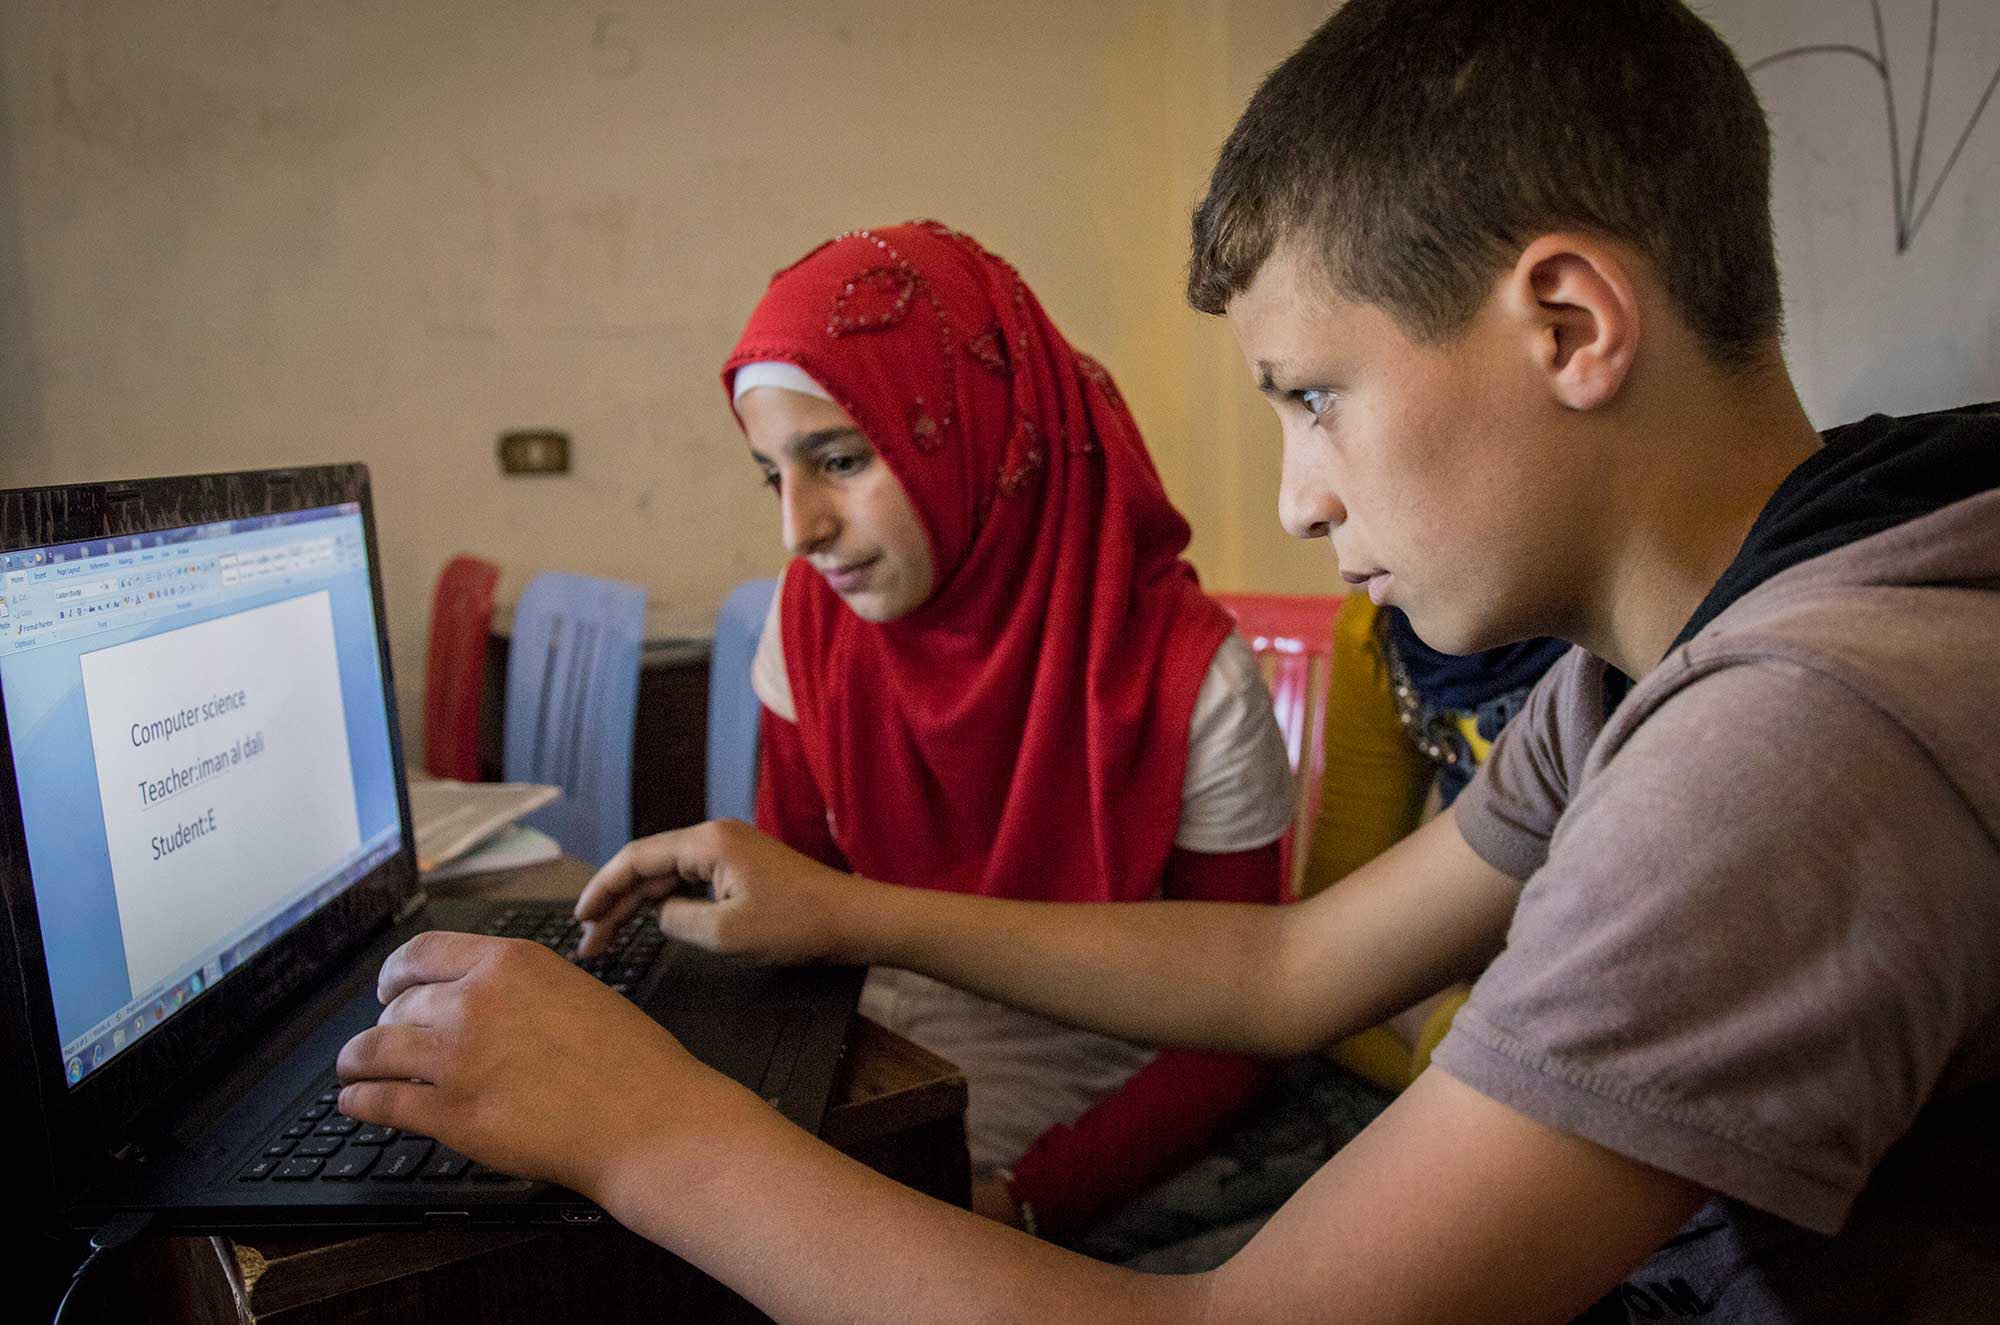 Jamil learns how to read, write and use computers as part of Anera's program for refugee education in Lebanon.